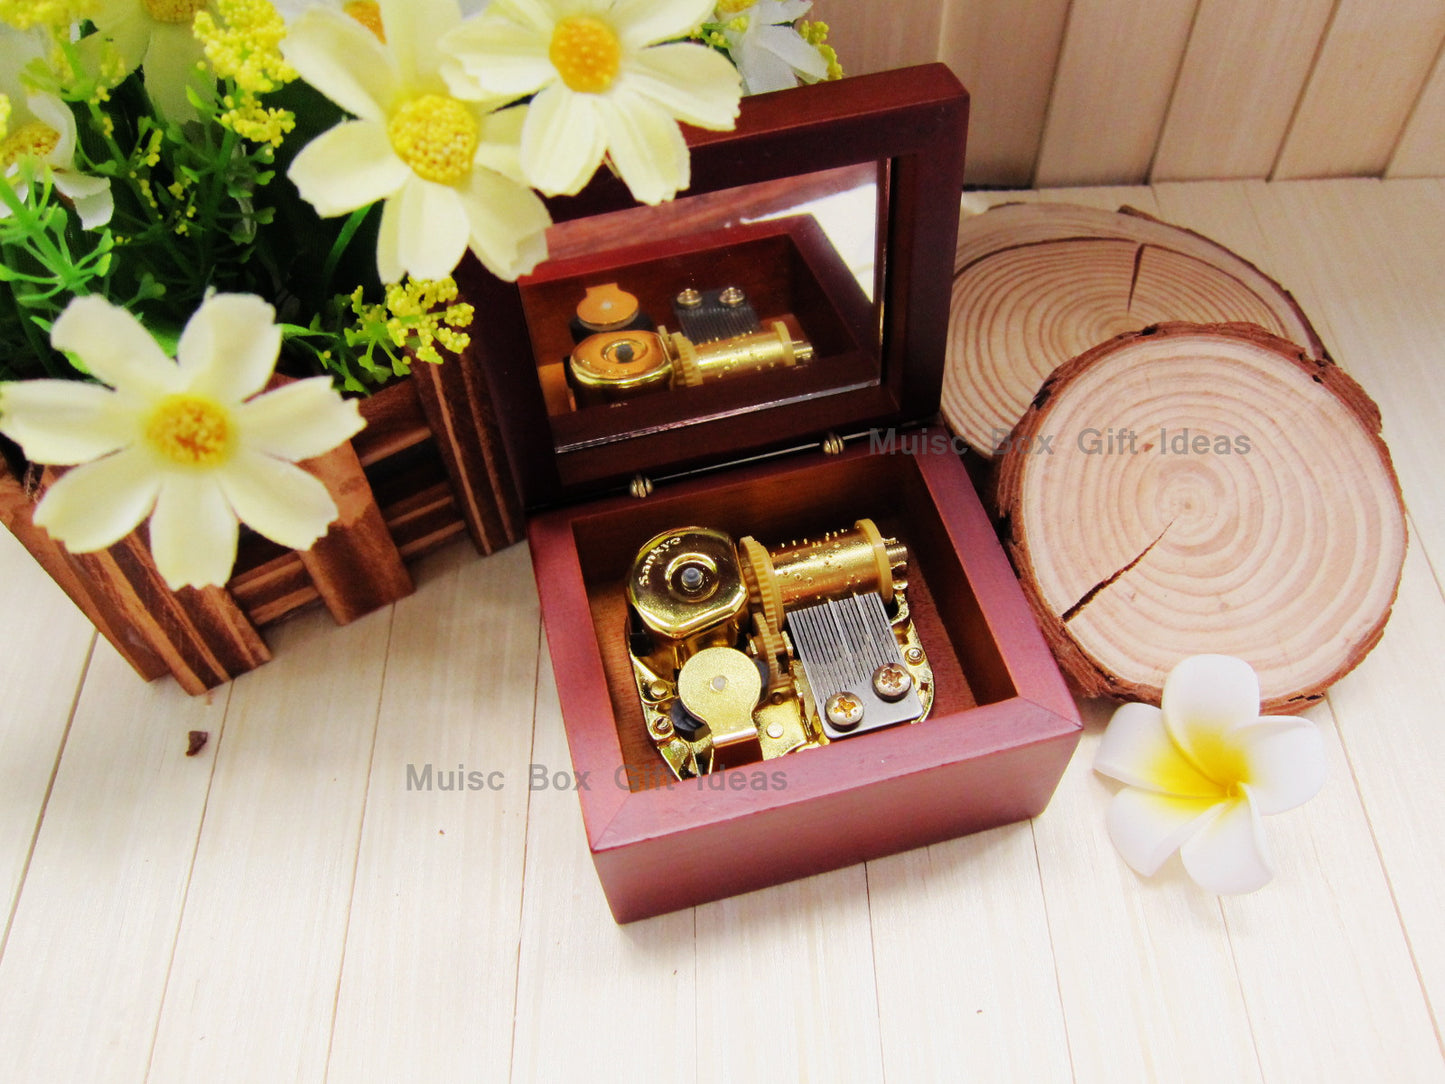 Soundtrack River Flows In You by Yiruma 18-Note Music Box Gift Twilight (Wooden Clockwork) - Music Box Gift Ideas